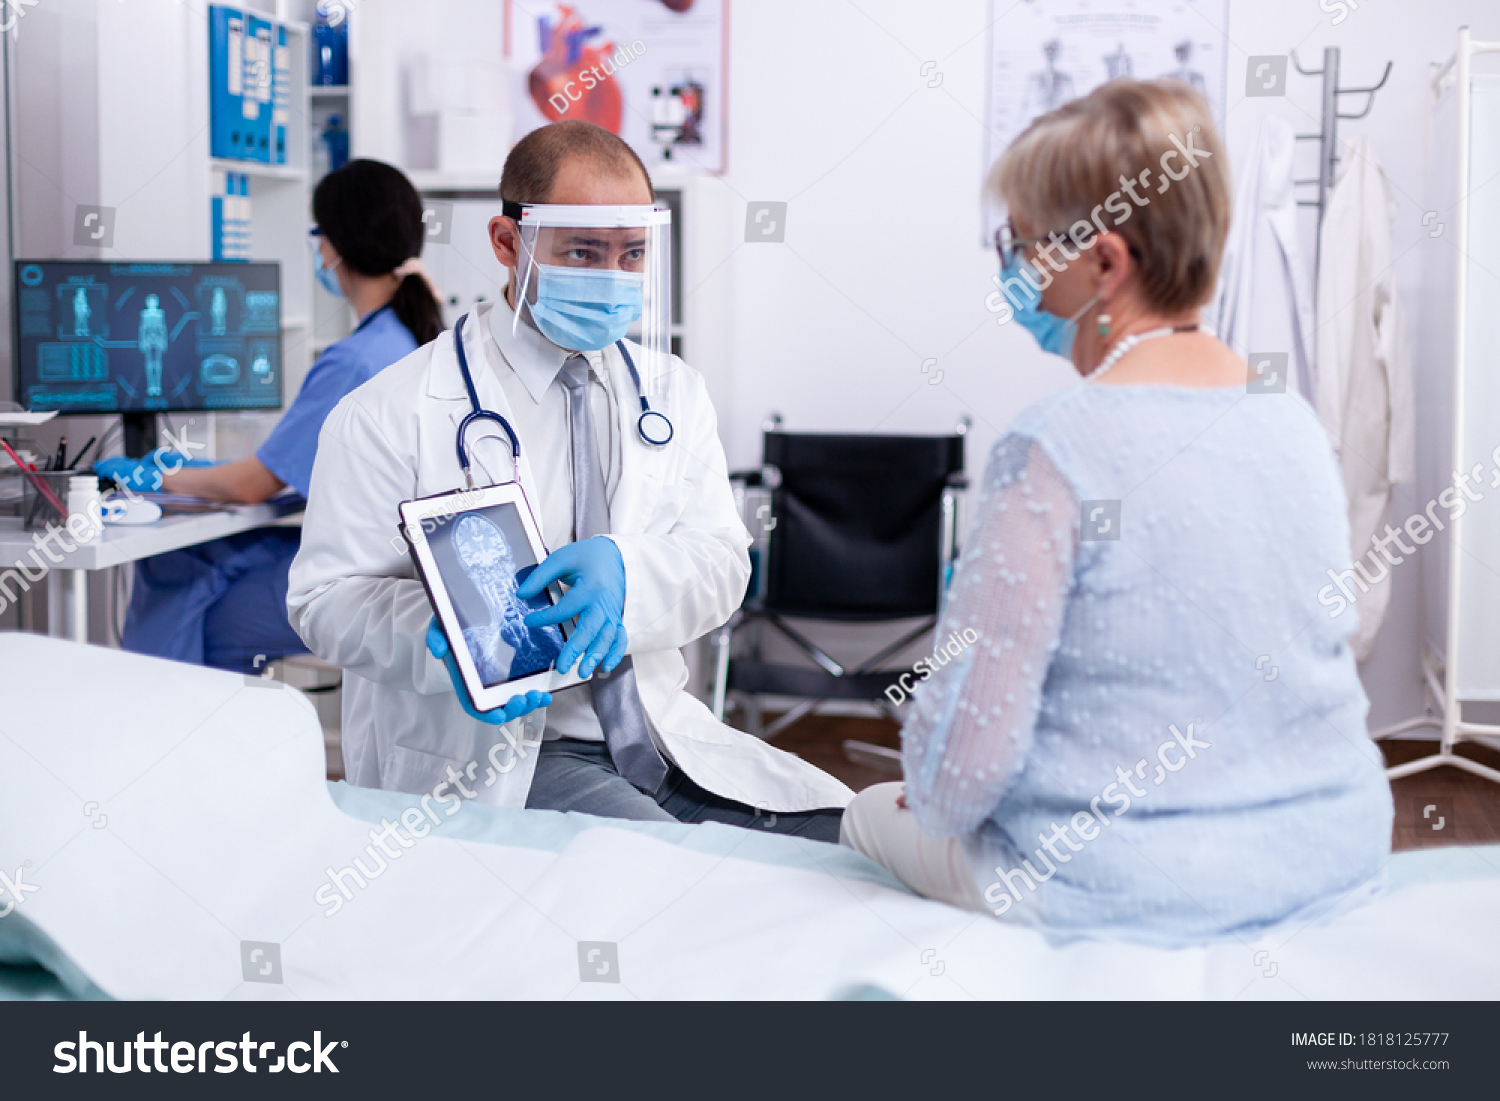 Doctor using tablet pc during examination of x-ray for older patient in hospital room and wearing face mask against coronavirus pandemic. Medical examination for infections, disease and diagnosis. #1818125777